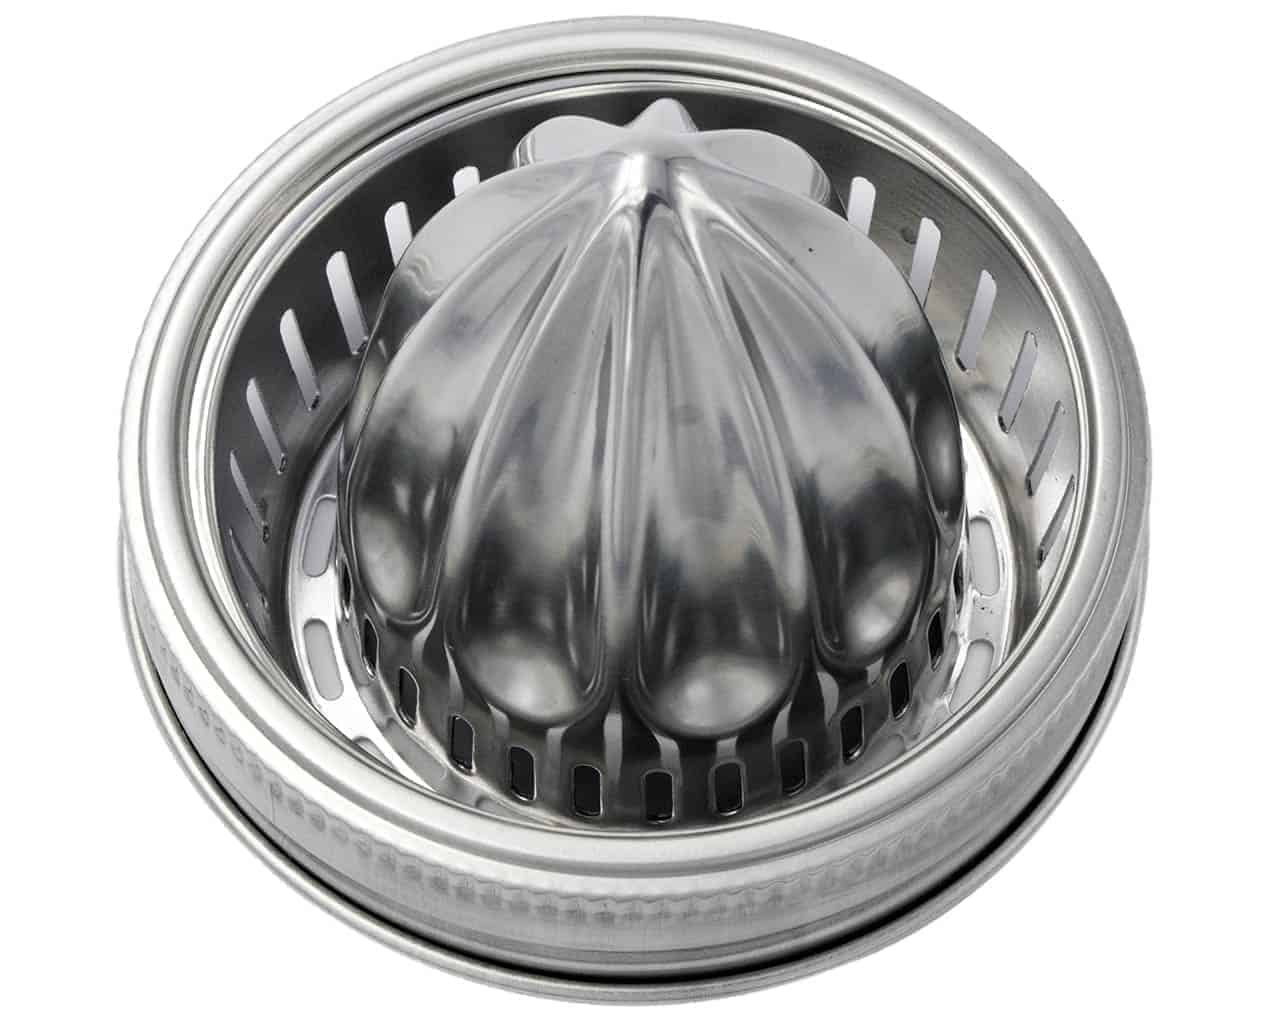 jarware-citrus-juicer-lid-with-mason-jar-lifestyle-wide-mouth-stainless-steel-rust-proof-band